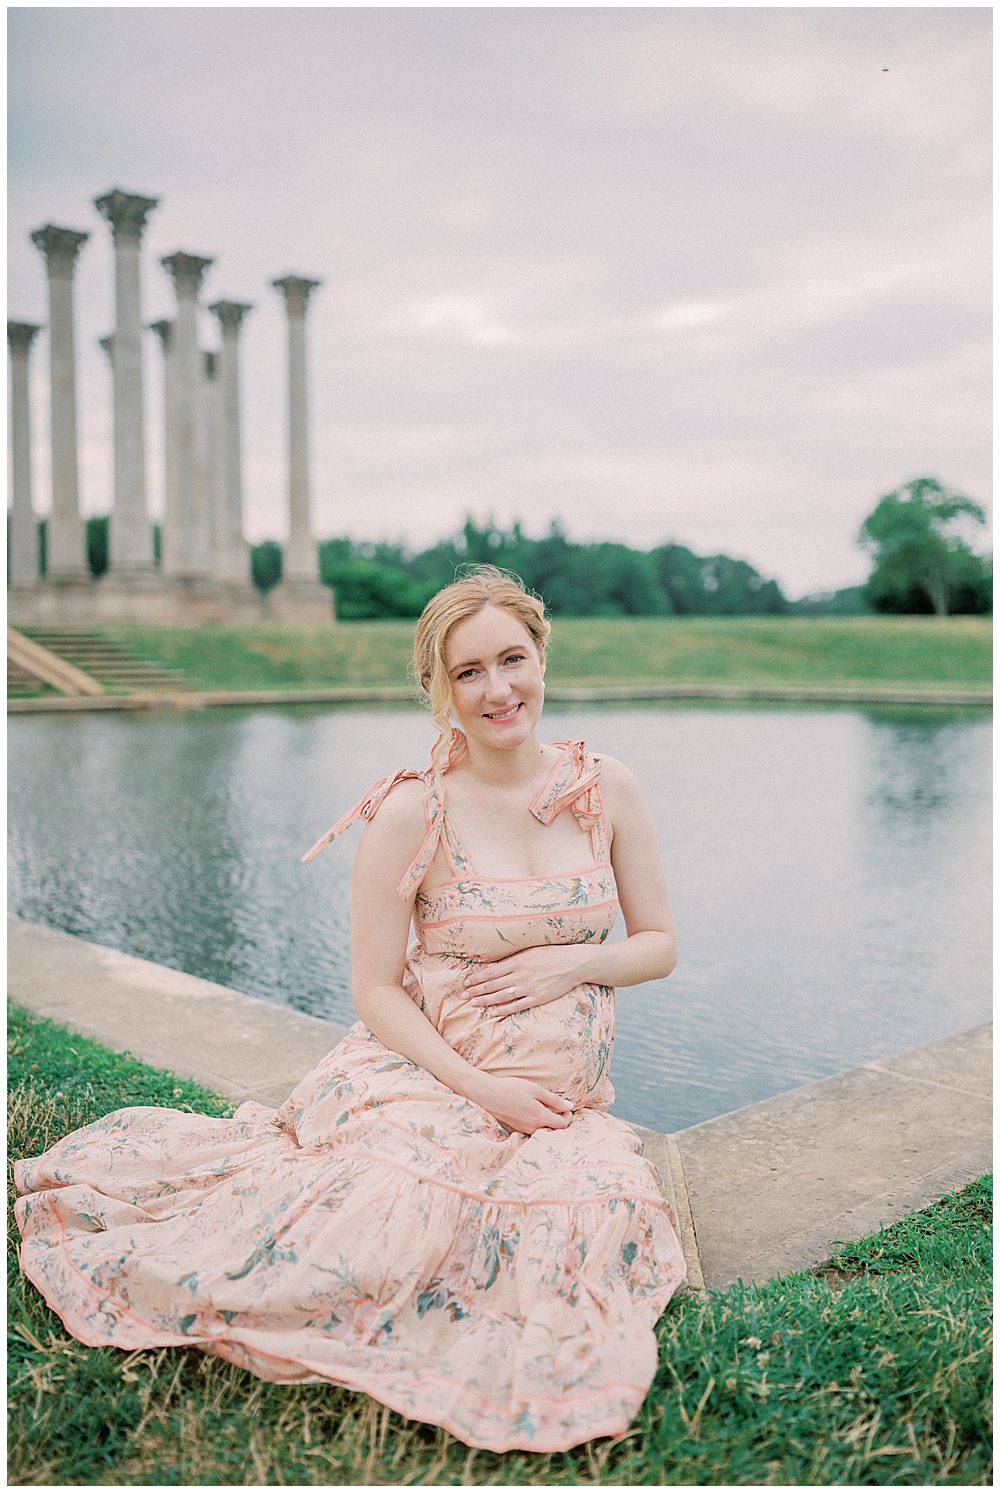 Pregnant blonde mother sits in front of pond at the National Arboretum and smiles at the camera.